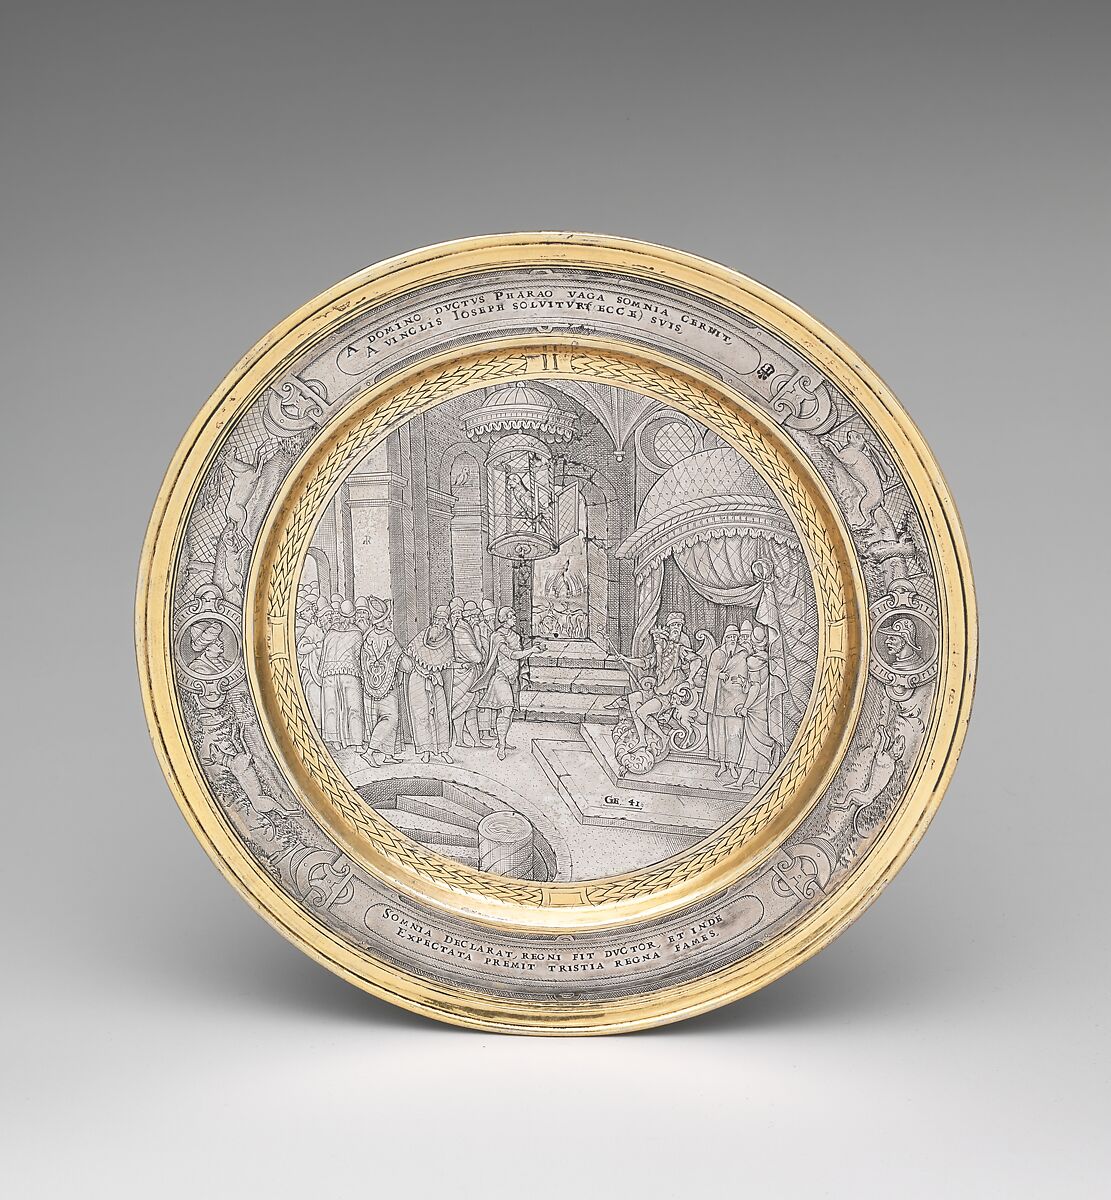 Joseph Interpreting Pharaoh's Dream, Possibly engraved by P.M., Silver, partly gilded, probably British 